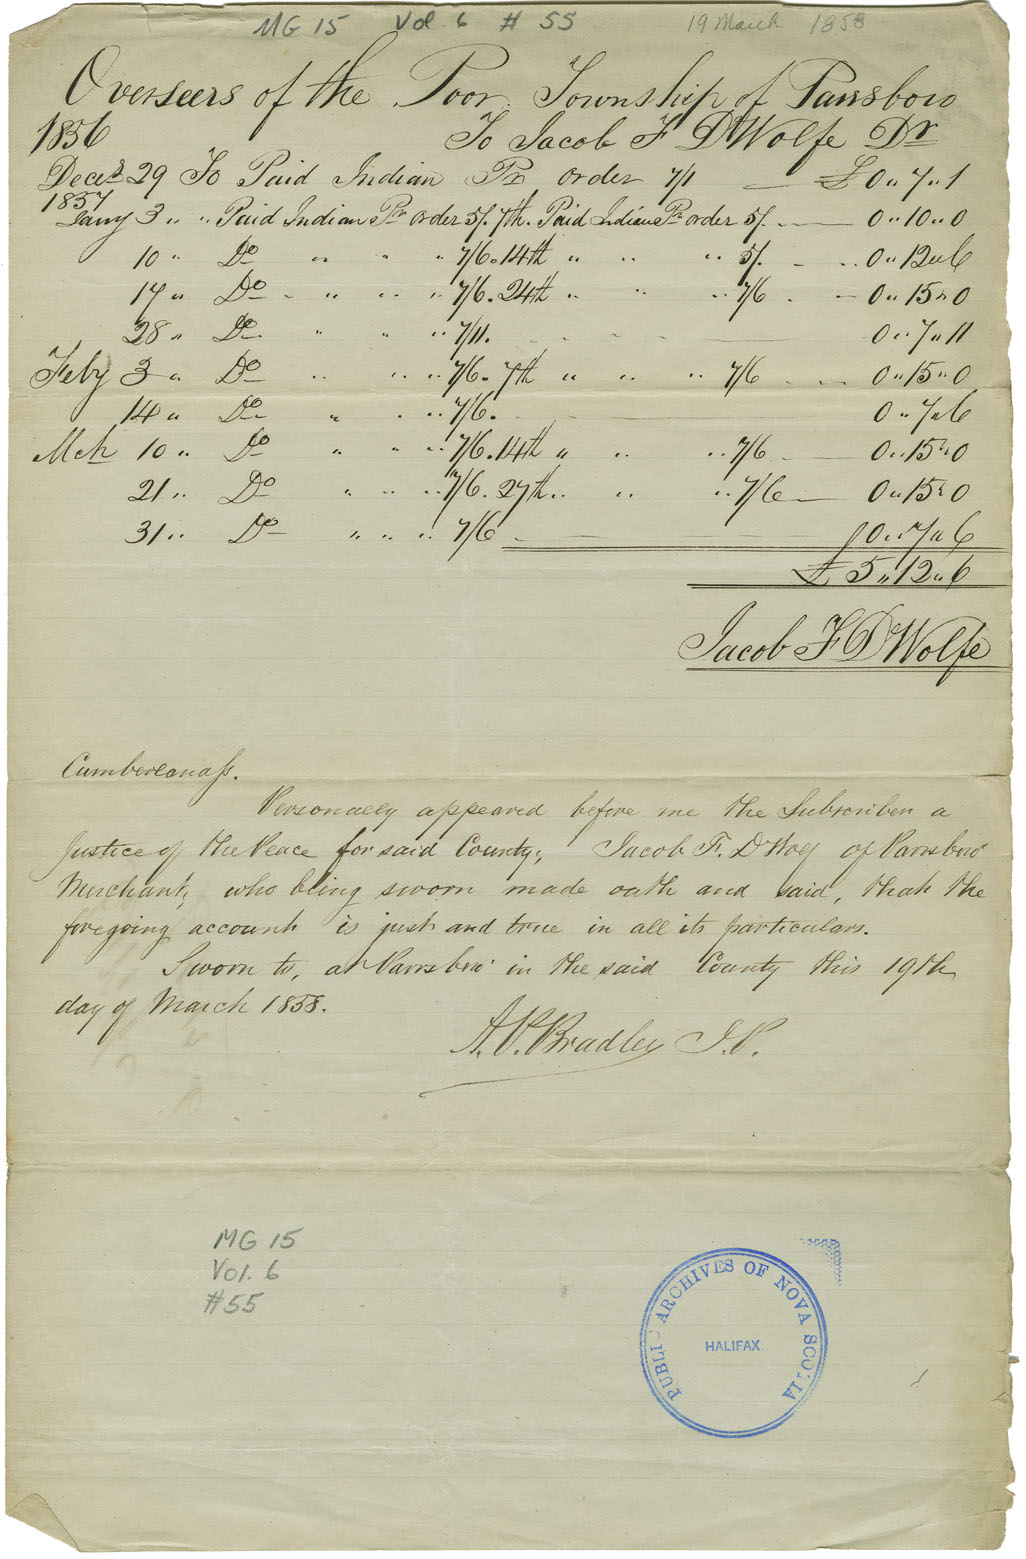 Account of monies for Mi'kmaq relief distributed by the Overseer of the Poor for Township of Parrsboro.